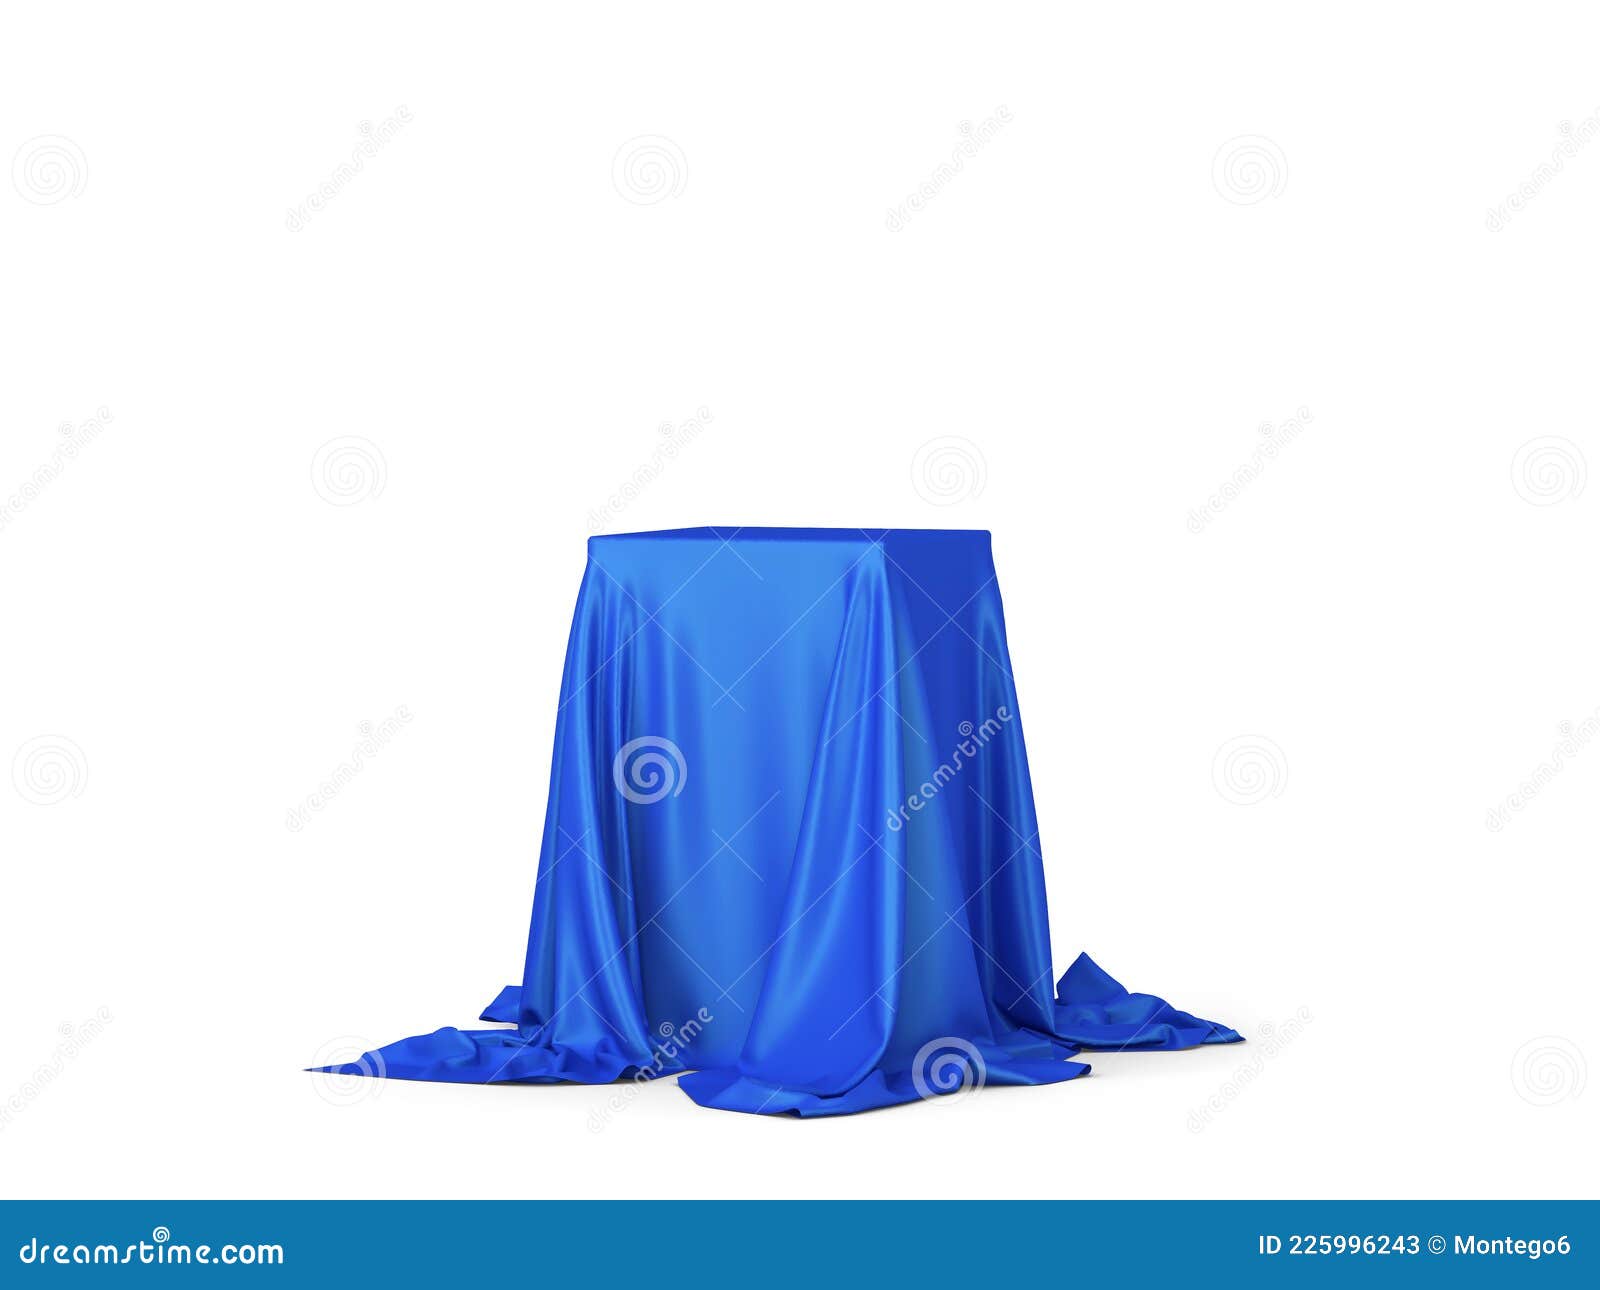 Cube Covered with Piece of Cloth Stock Illustration - Illustration of ...